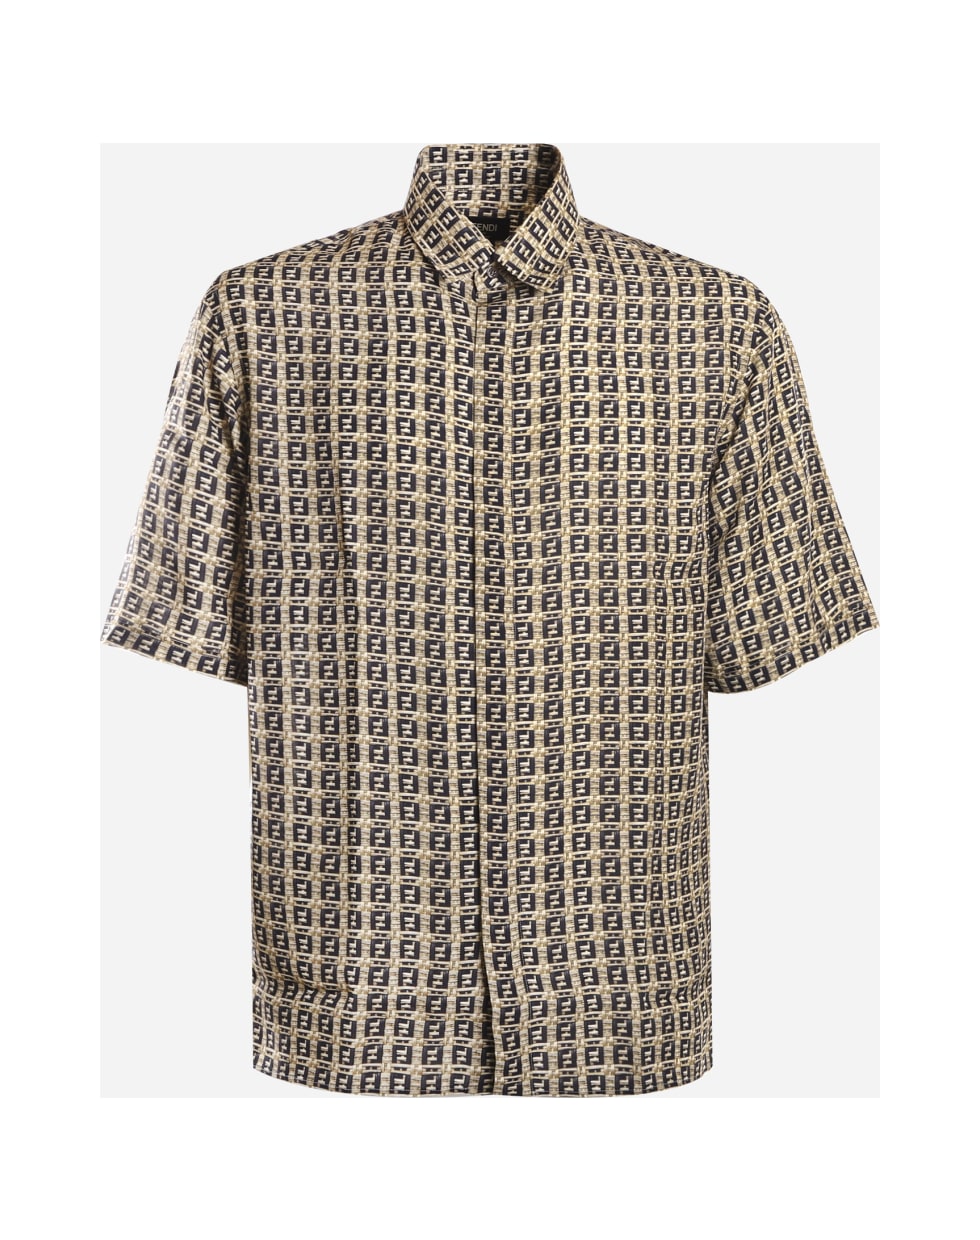 Fendi Oversized Shirt With All-over Ff Motif - Beige